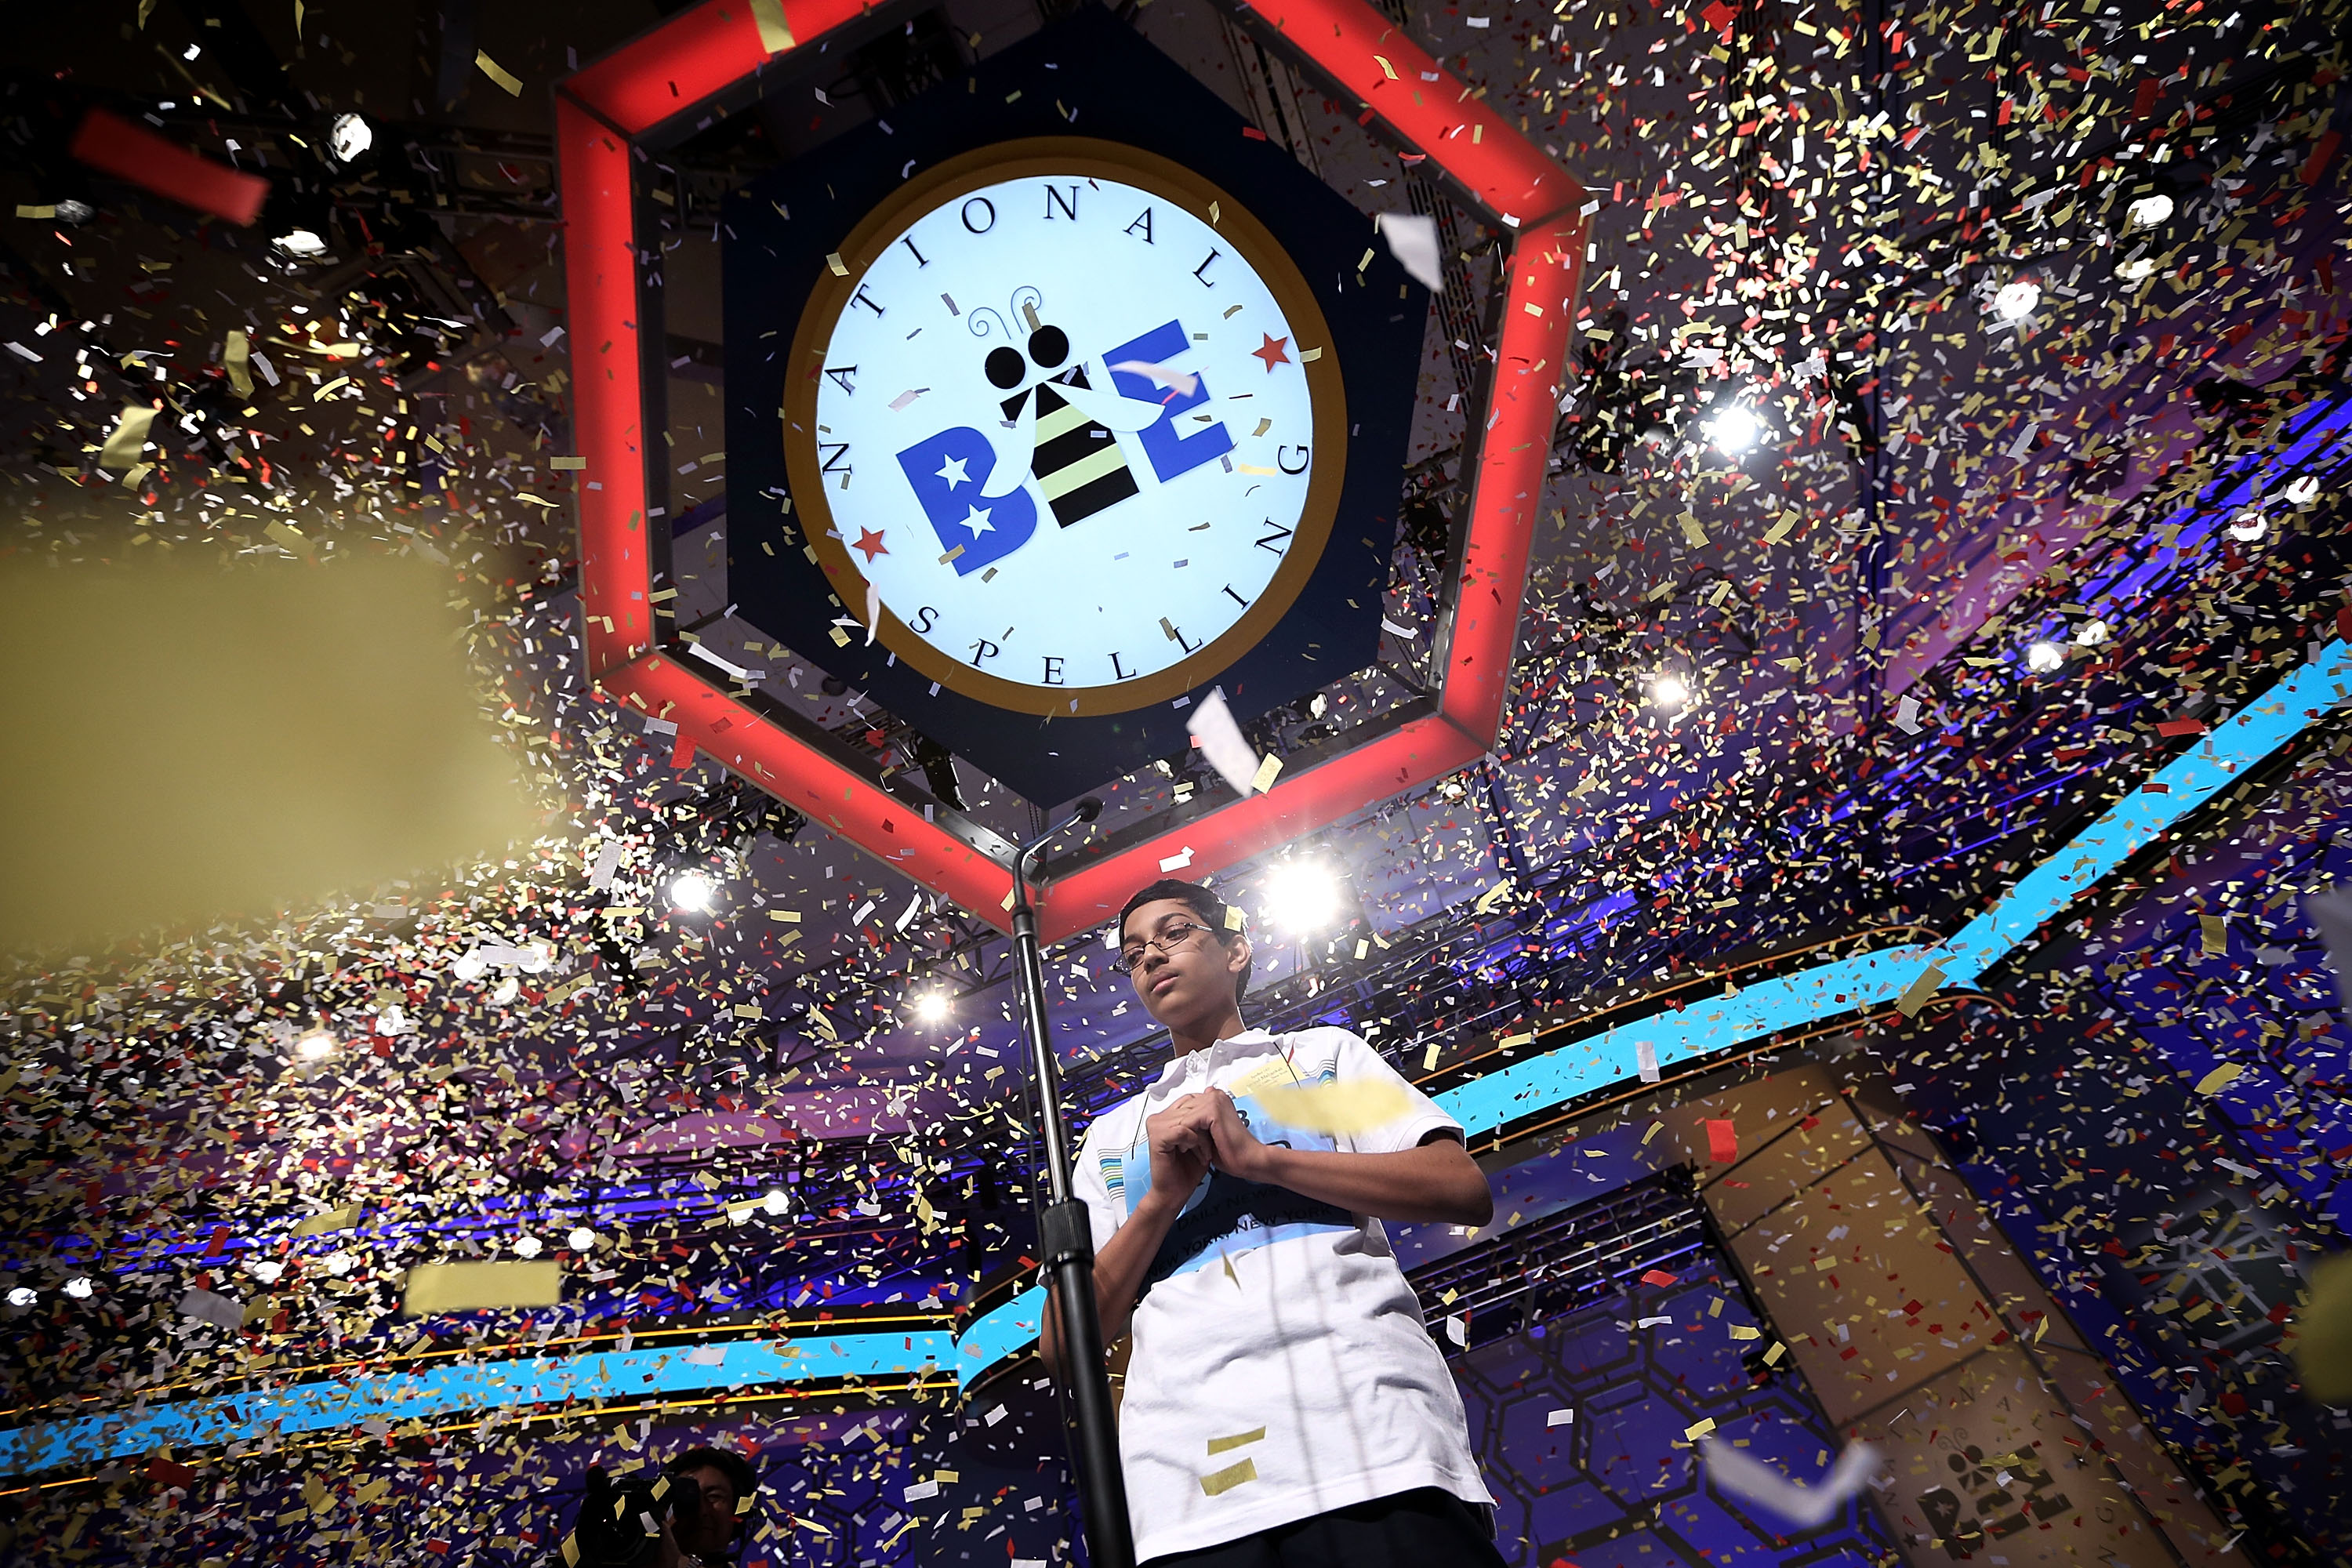 Confetti falls over Arvind Mahankali of New York after the finals of the 2013 Scripps National Spelling Bee.